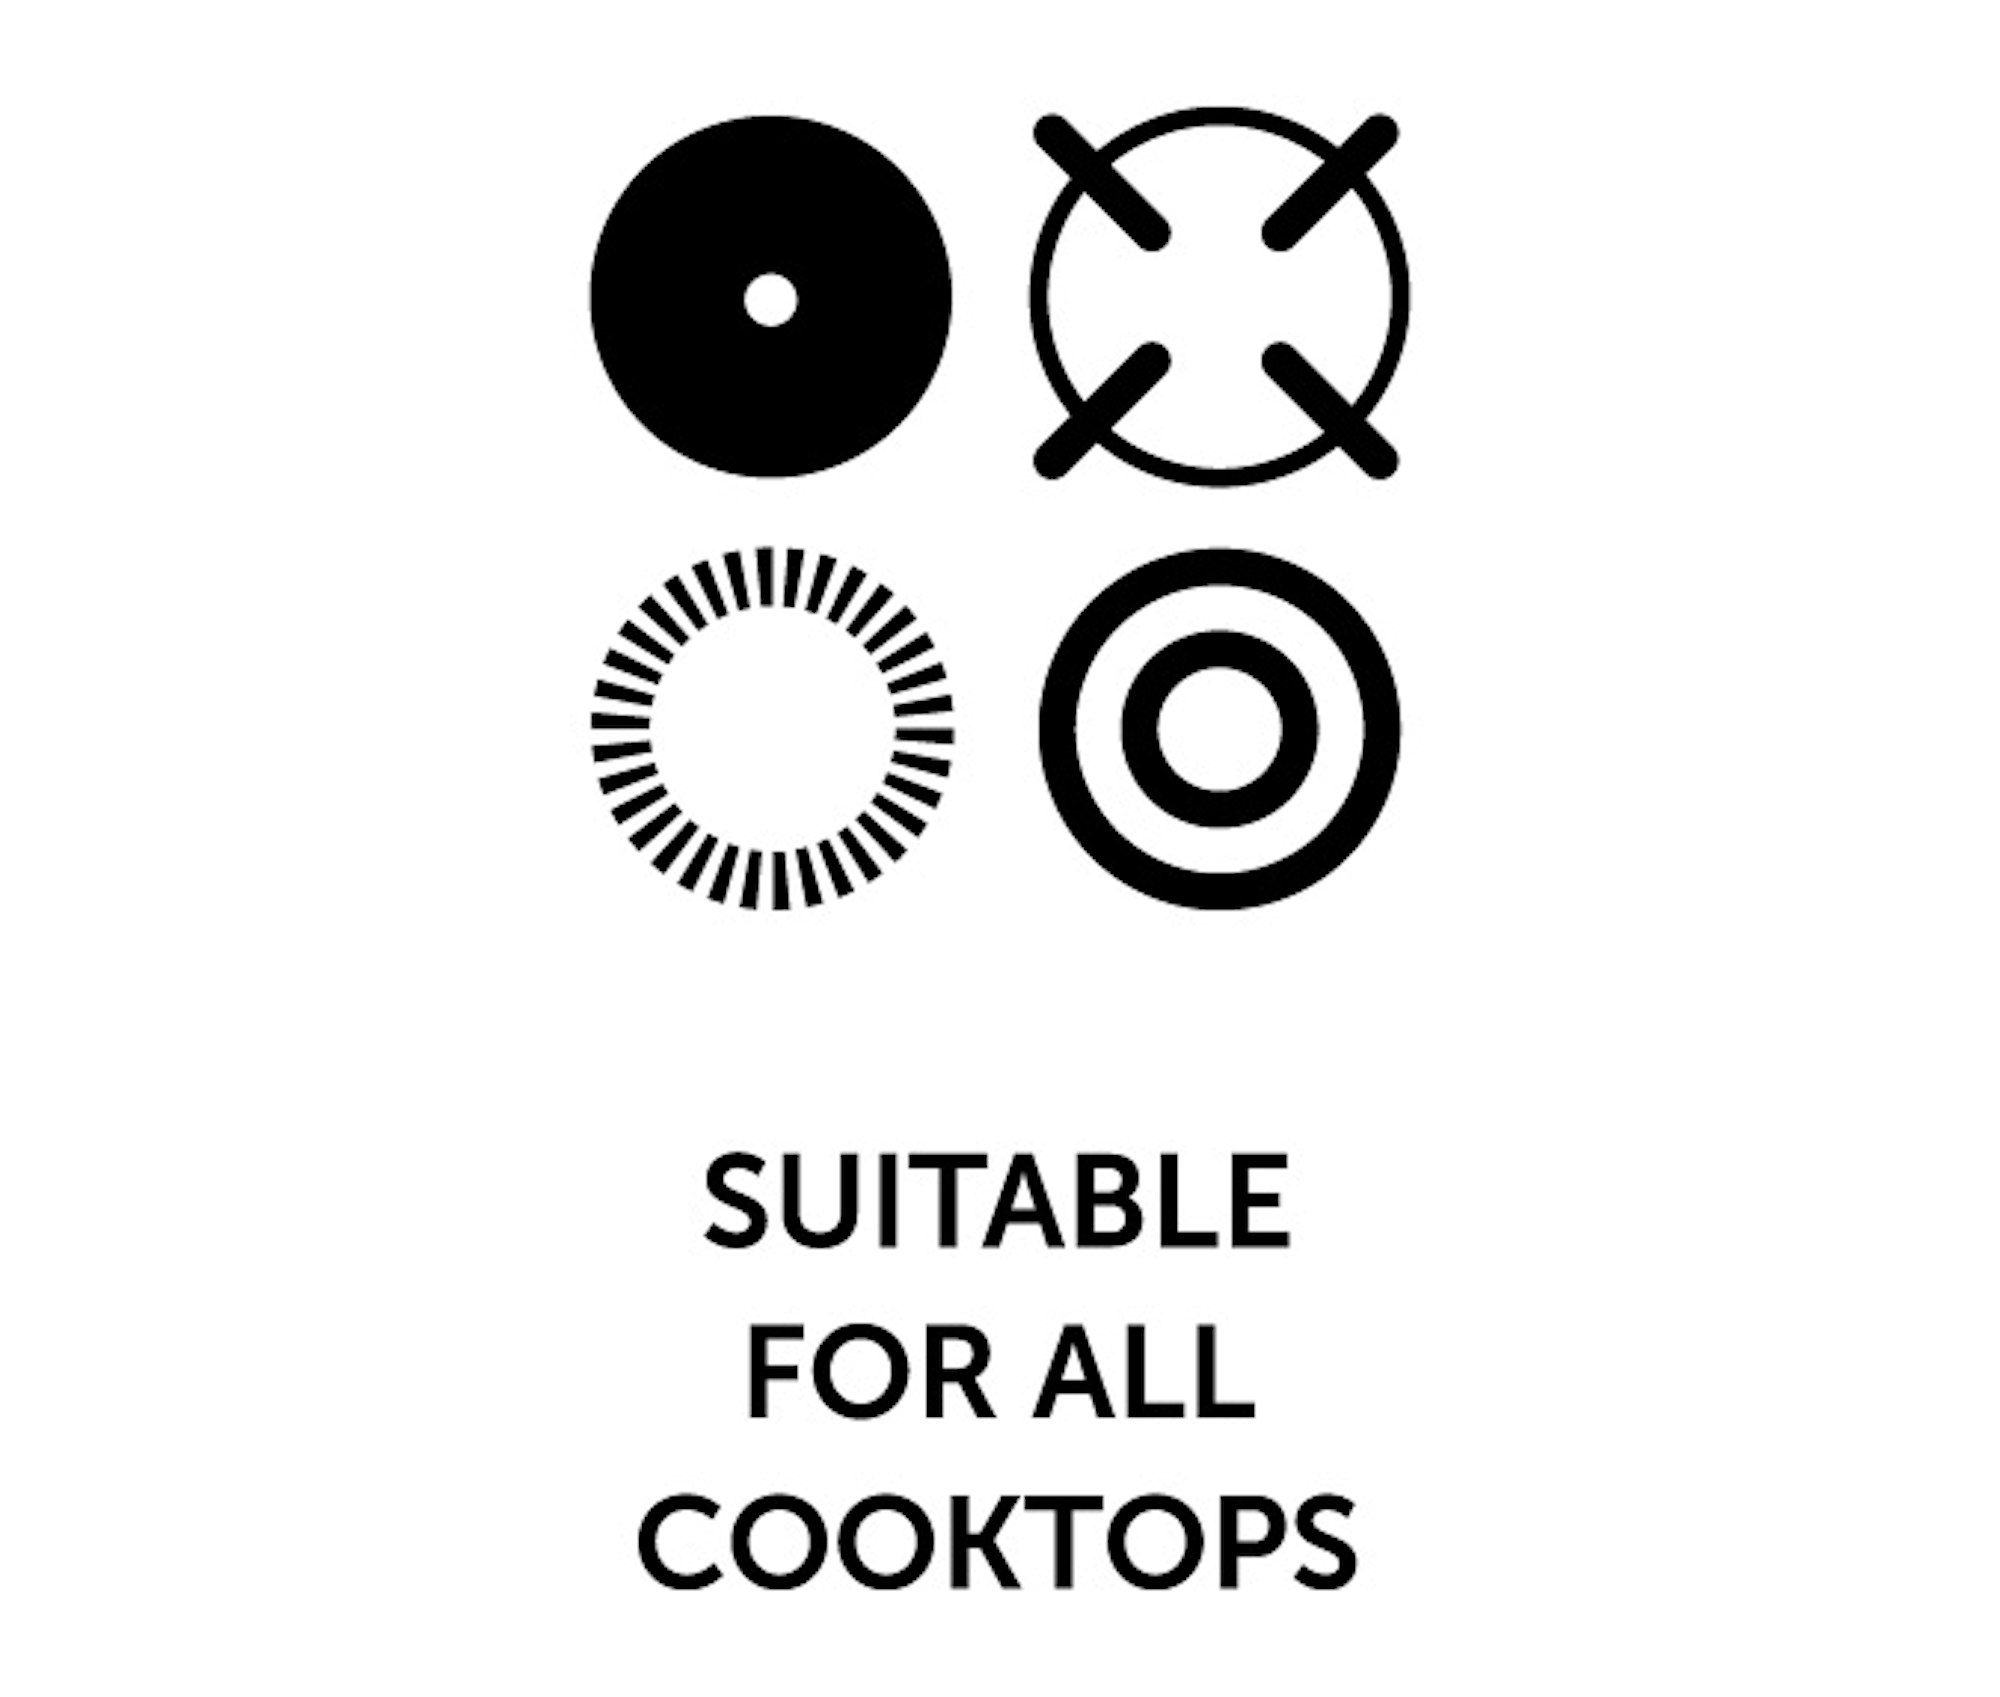 Suitable for all cooktops